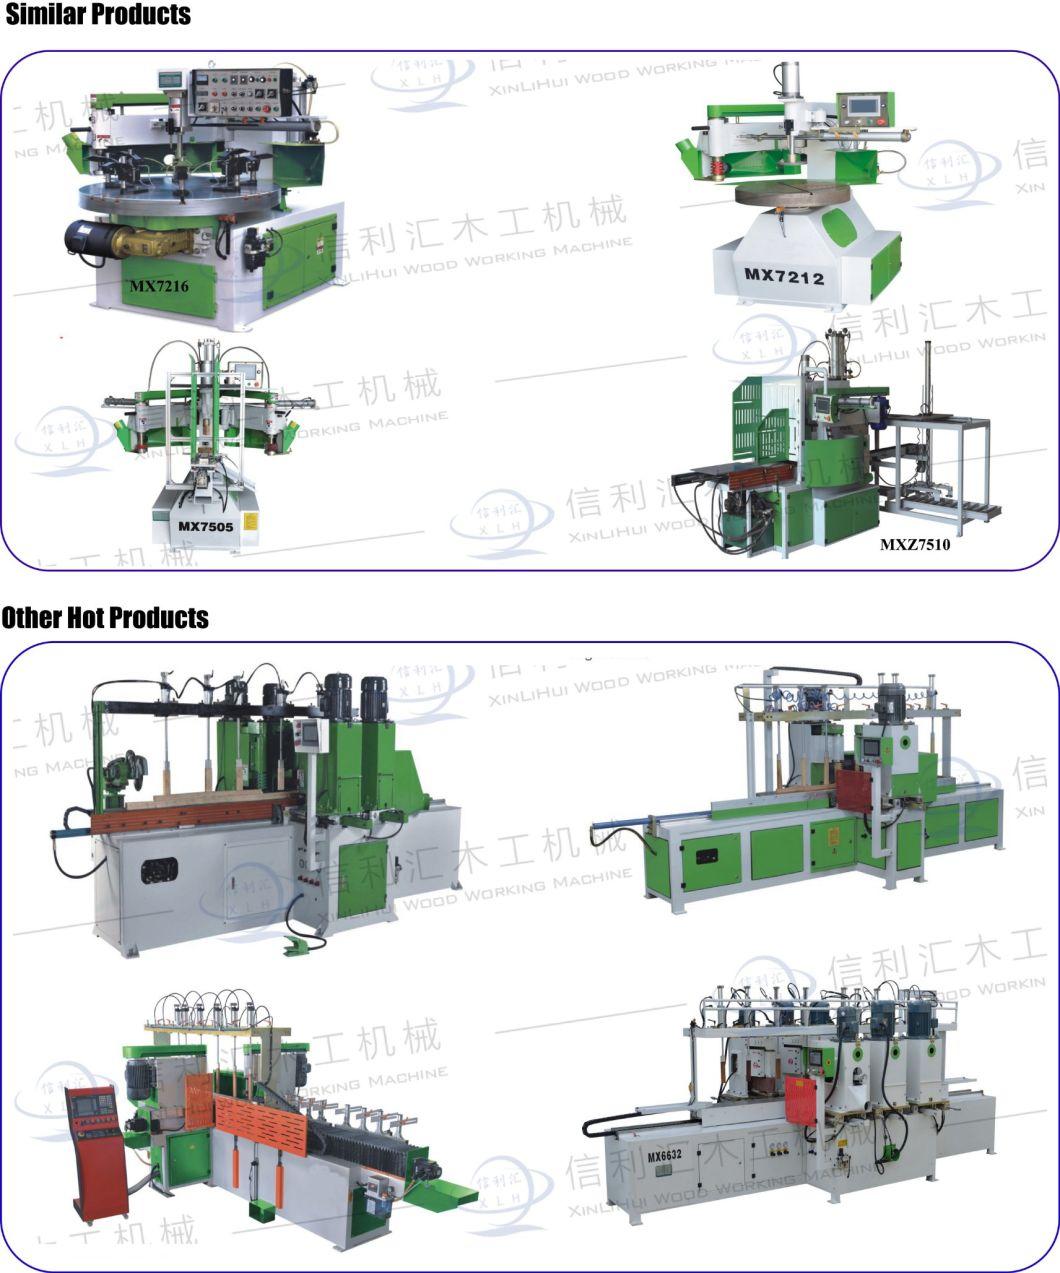 CNC Double-End Tenoning Machine Produce Various Shapes of Gimmicks Such as Squares, Rectangles, Waists, Circles, and Slanted Hoes